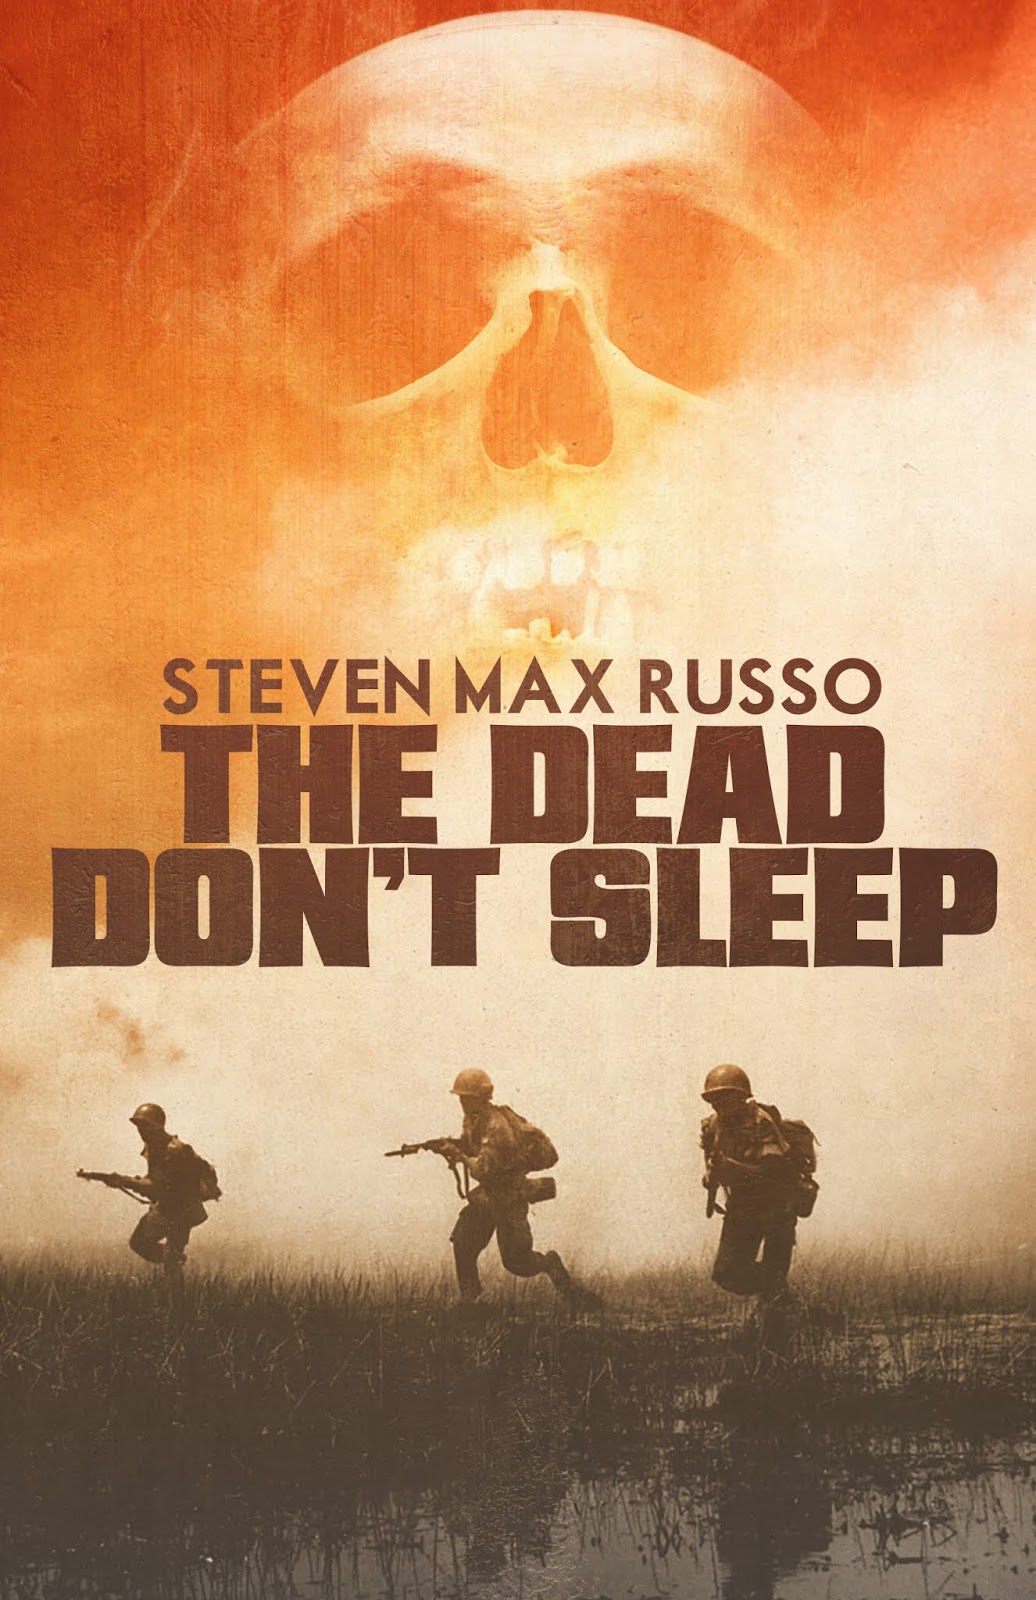 Interview with thriller author Steven Max Russo